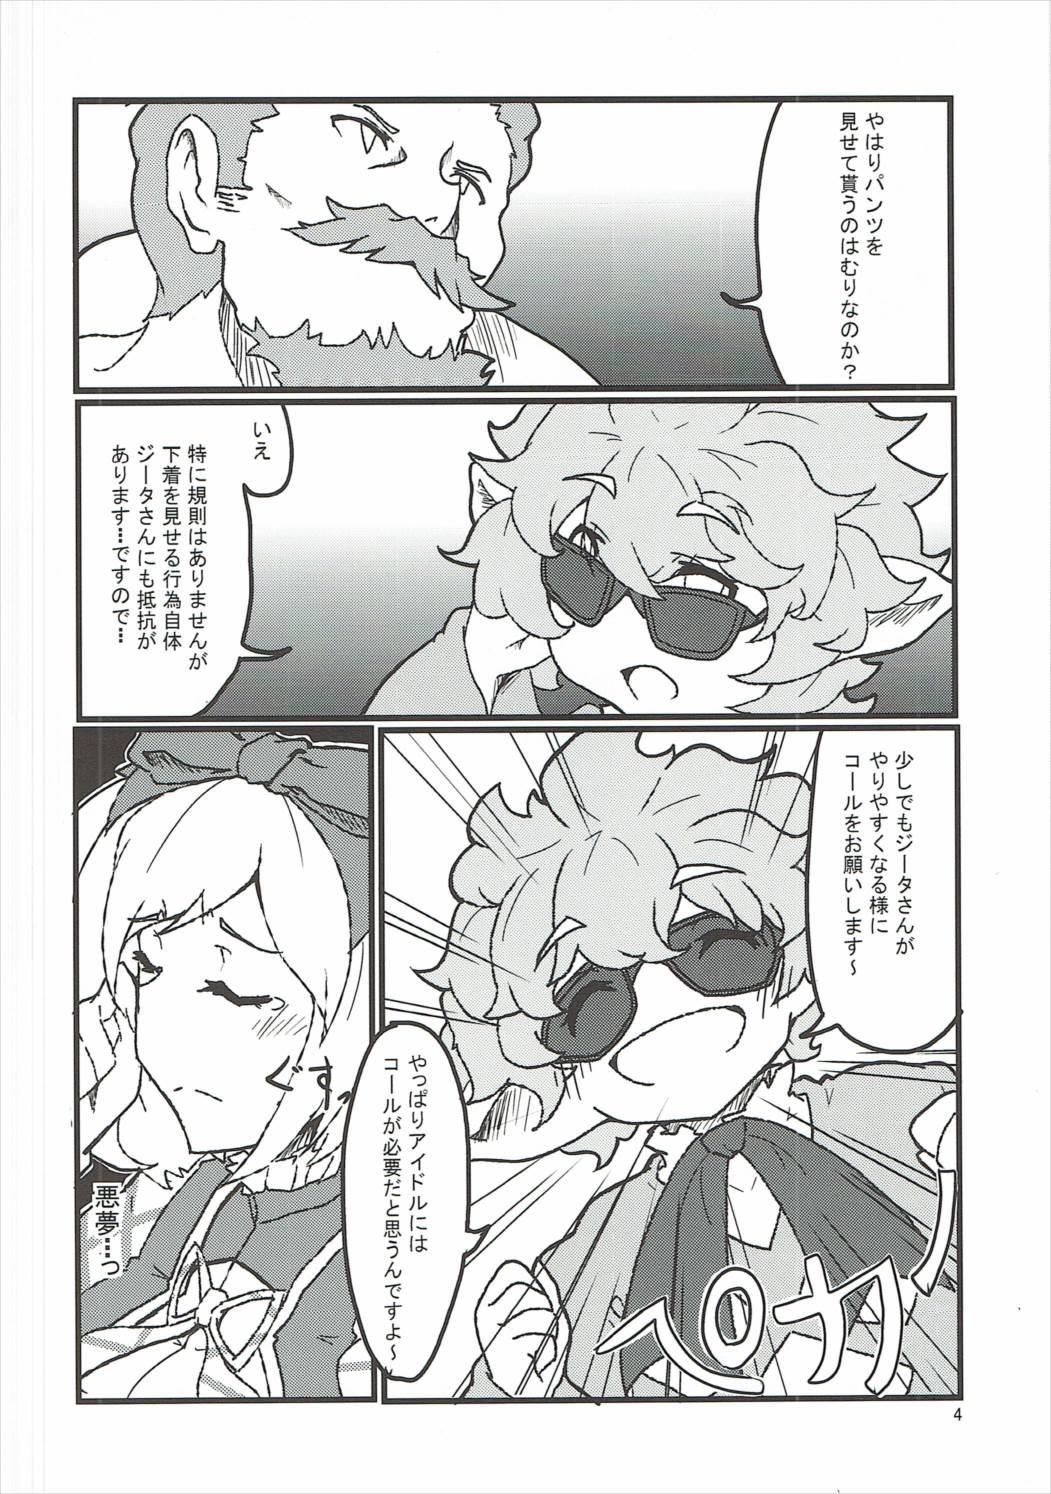 Butts Surprise Ticket - Granblue fantasy Stroking - Page 5